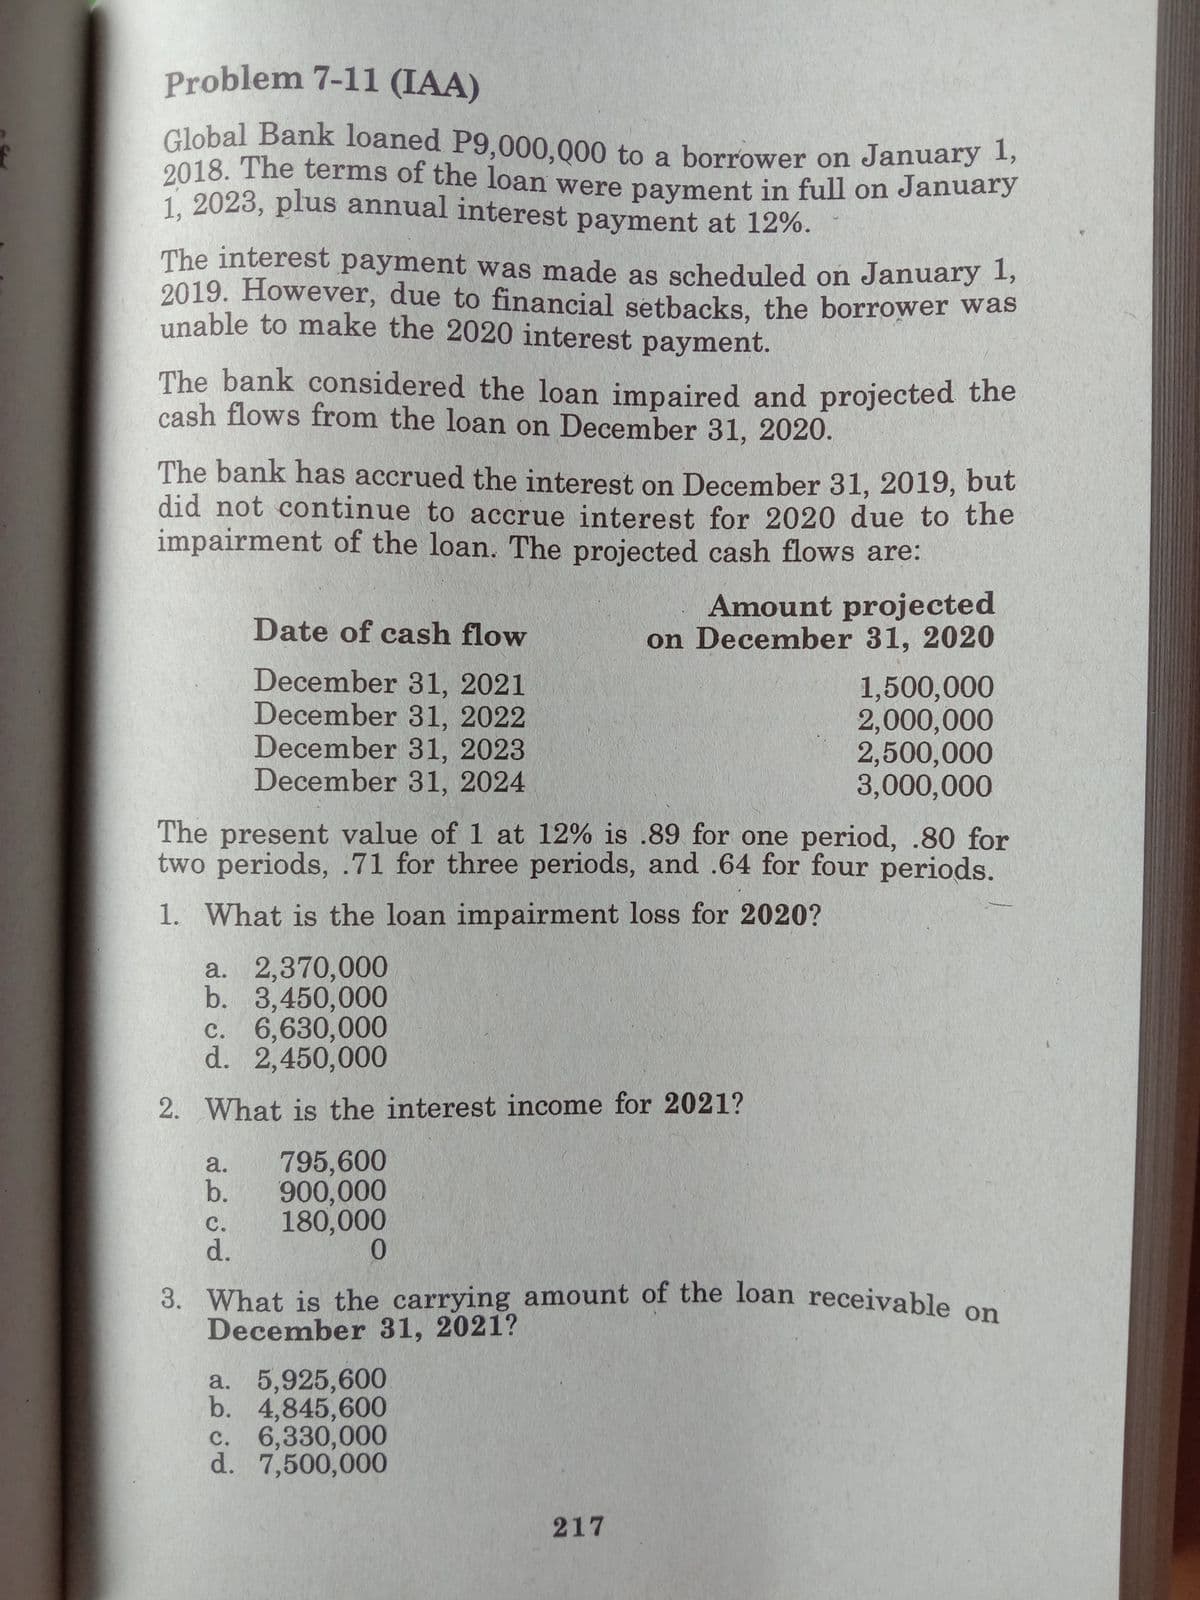 2018. The terms of the loan were payment in full on January
3. What is the carrying amount of the loan receivable on
Problem 7-11 (IAA)
Global Bank loaned P9,000,000 to a borrower on January 1,
2018. The terms of the loan were payment in full on January
1. 2023, plus annual interest payment at 12%.
The interest payment was made as scheduled on January 1,
2019. However, due to financial setbacks, the borrower was
unable to make the 2020 interest payment.
The bank considered the loan impaired and projected the
cash flows from the loan on December 31, 2020.
The bank has accrued the interest on December 31, 2019, but
did not continue to accrue interest for 2020 due to the
impairment of the loan. The projected cash flows are:
Amount projected
on December 31, 2020
Date of cash flow
December 31, 2021
December 31, 2022
December 31, 2023
December 31, 2024
1,500,000
2,000,000
2,500,000
3,000,000
The present value of 1 at 12% is .89 for one period, .80 for
two periods, .71 for three periods, and .64 for four periods.
1. What is the loan impairment loss for 2020?
a. 2,370,000
b. 3,450,000
c. 6,630,000
d. 2,450,000
2. What is the interest income for 2021?
795,600
900,000
180,000
0.
a.
b.
с.
d.
3. What is the carrying amount of the loan receivable on
December 31, 2021?
a. 5,925,600
b. 4,845,600
c. 6,330,000
d. 7,500,000
217
